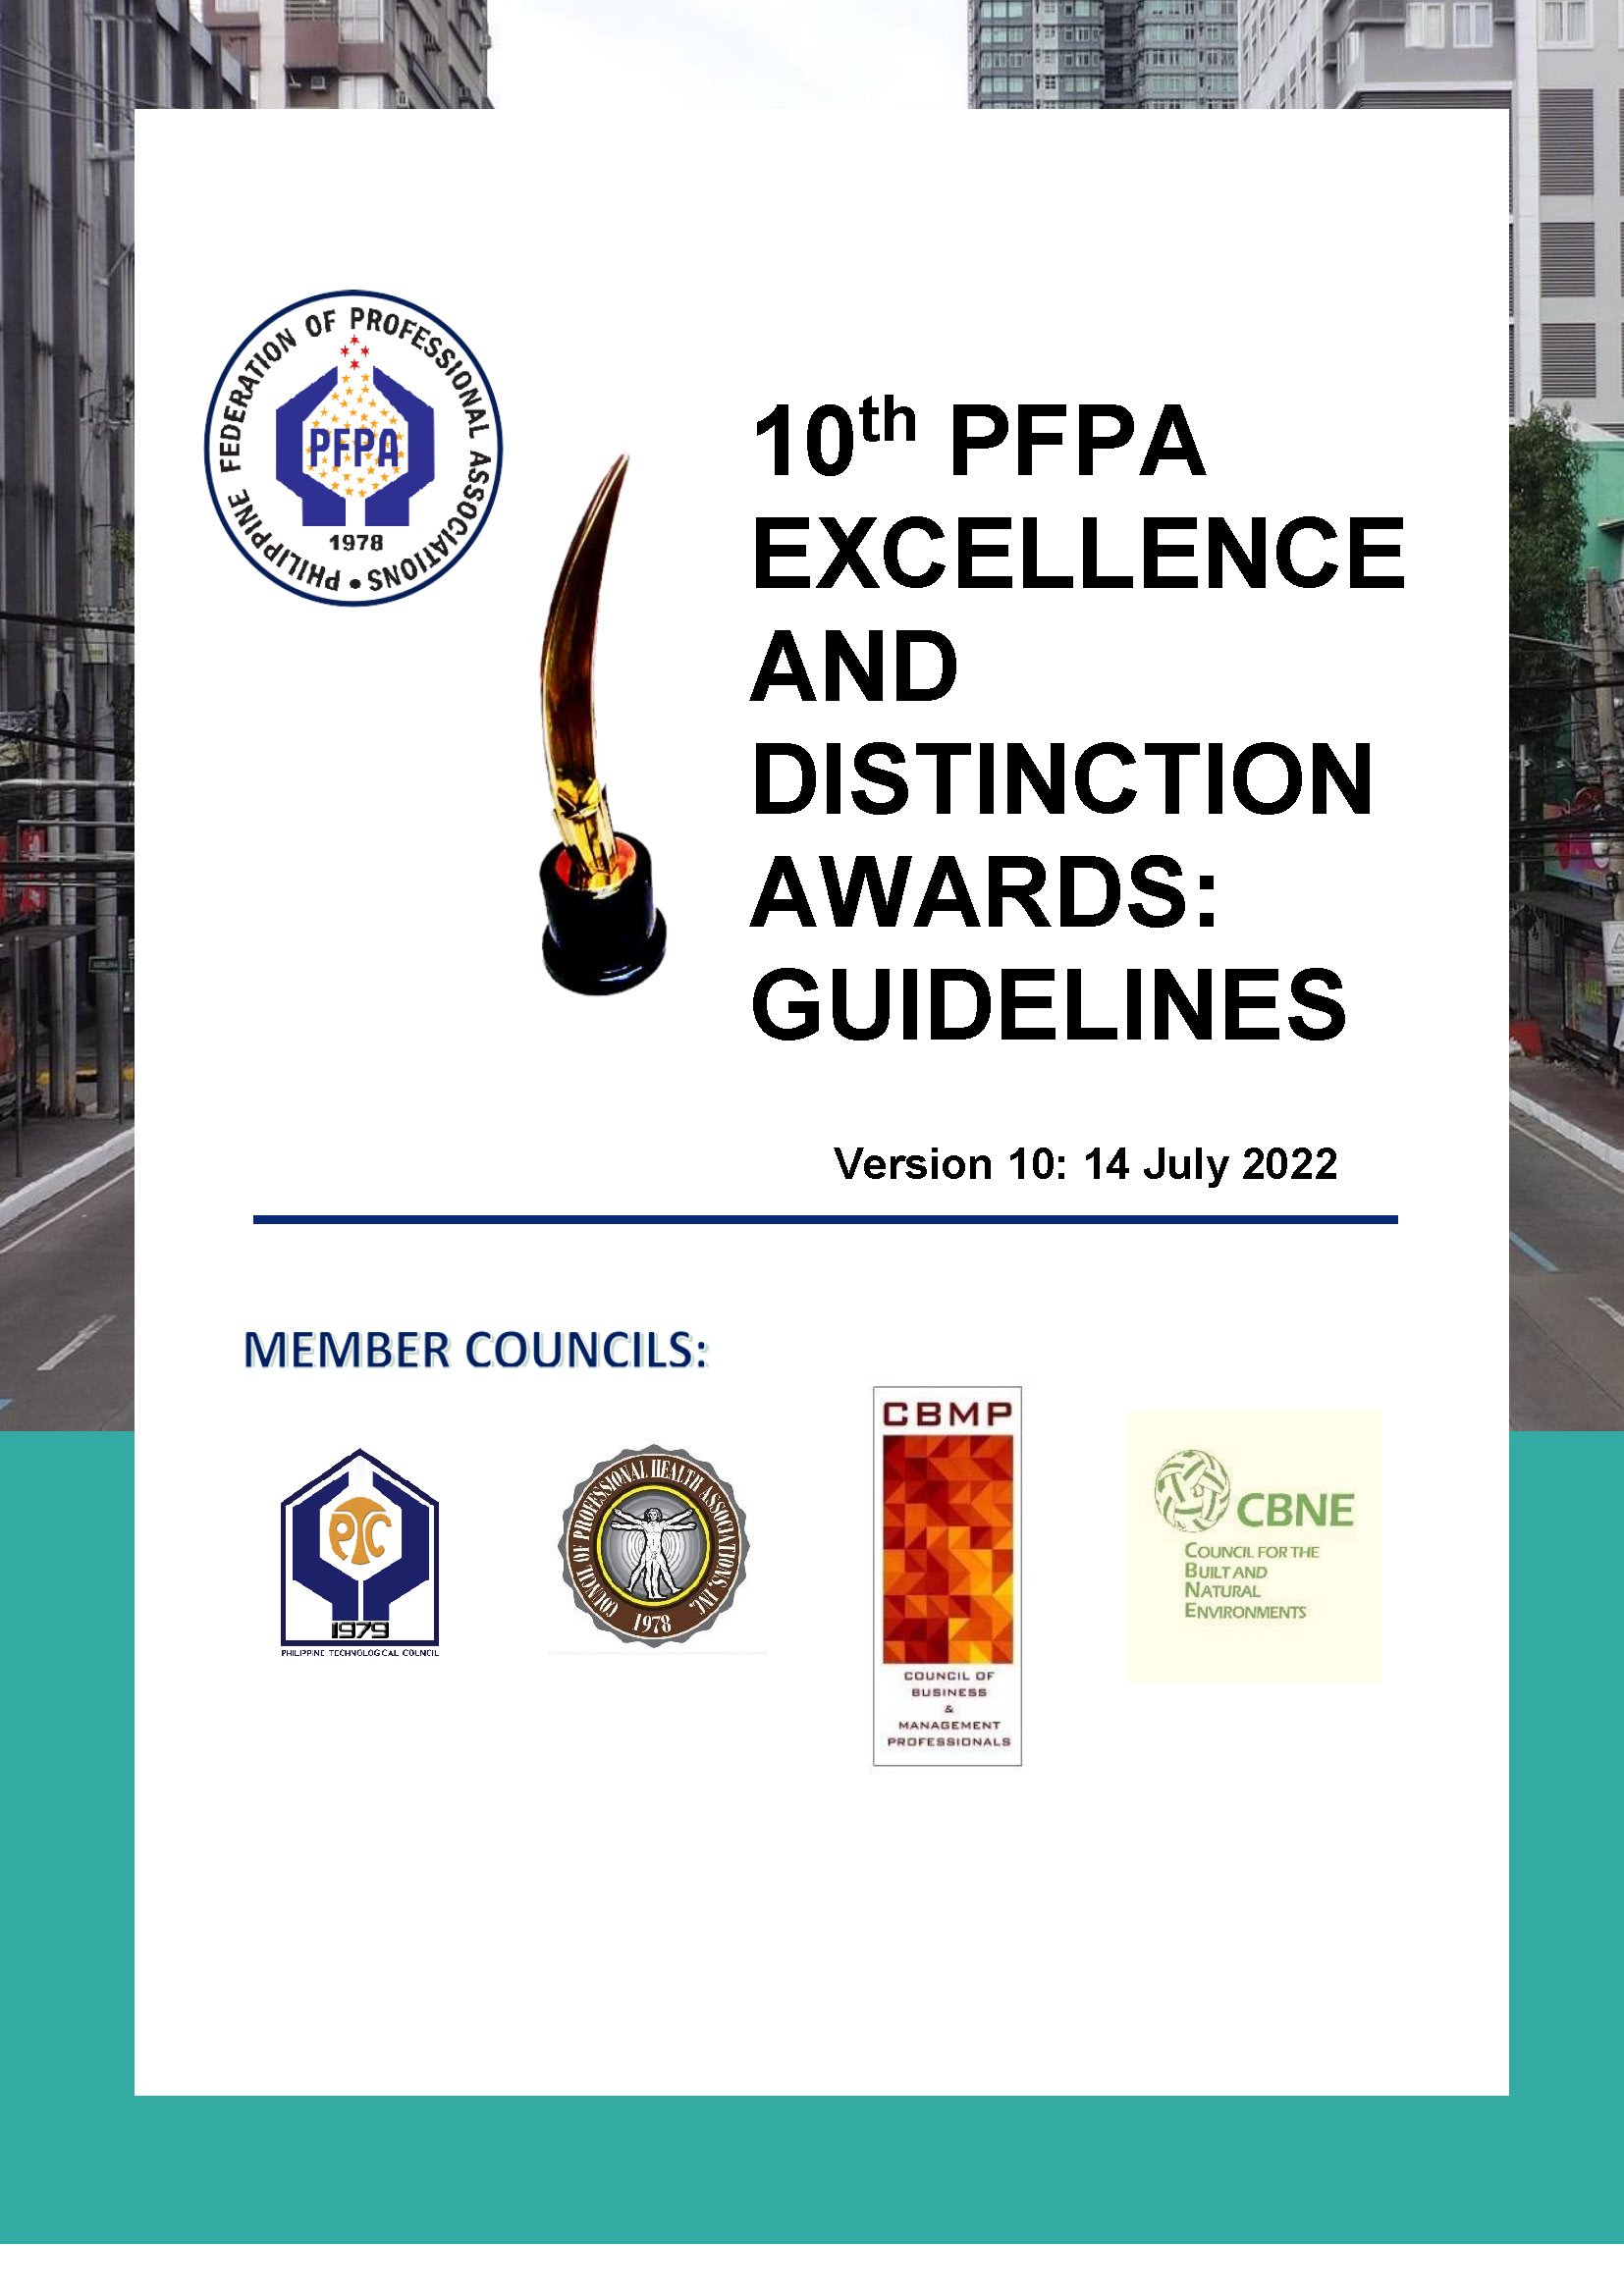 PFPA-Excellence-Awards-Guidelines-new (1)_Page_01.jpg